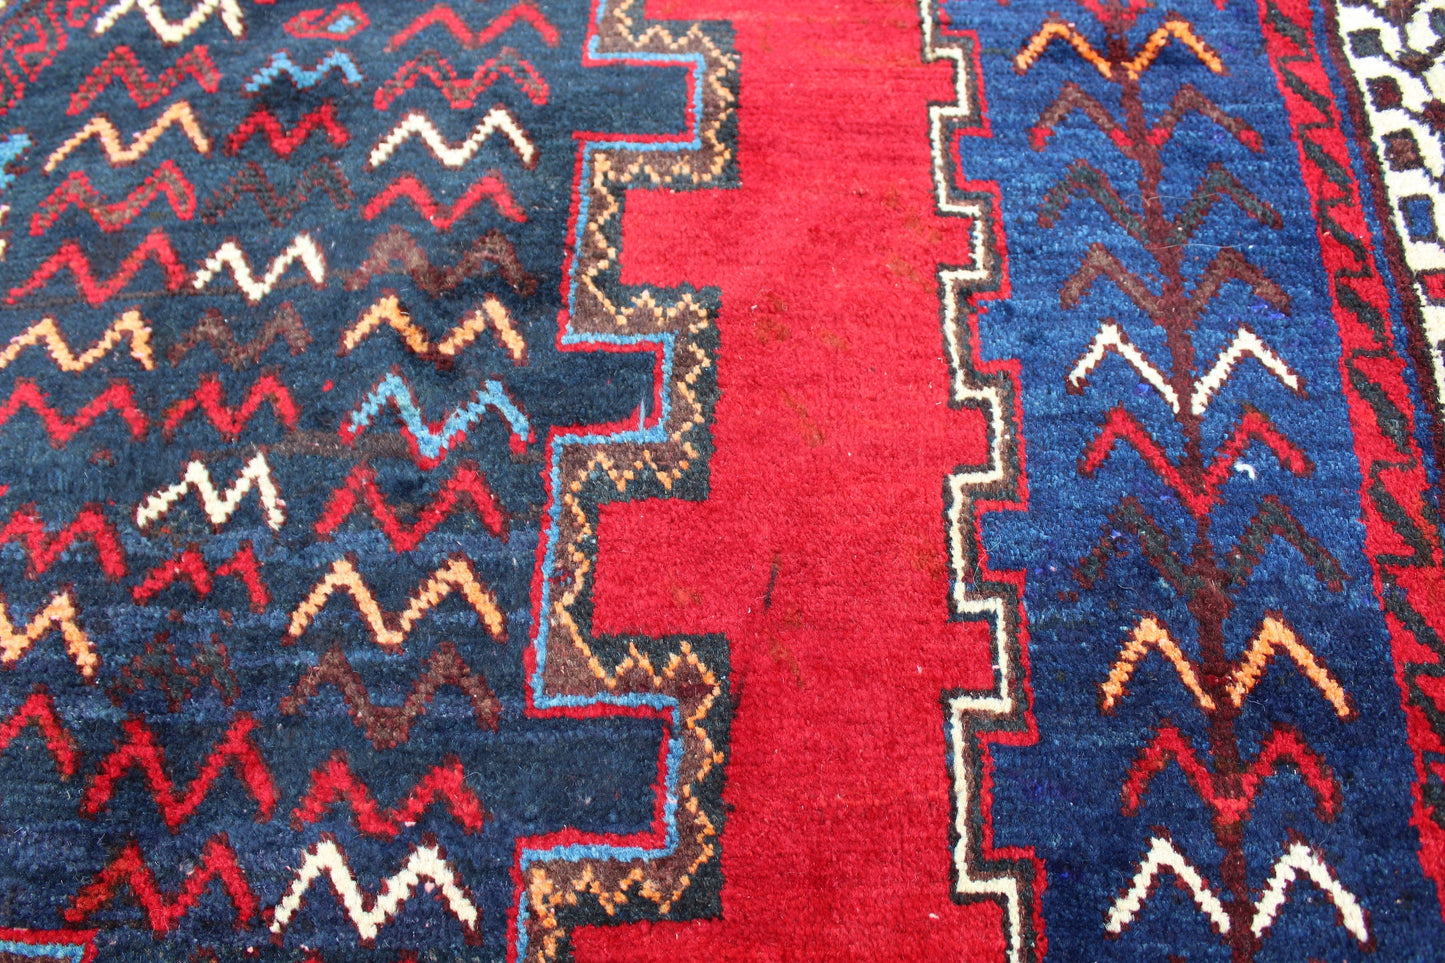 Blue 5x6 Rug with Red Accents | Wool Hand Knotted Tribal Rug